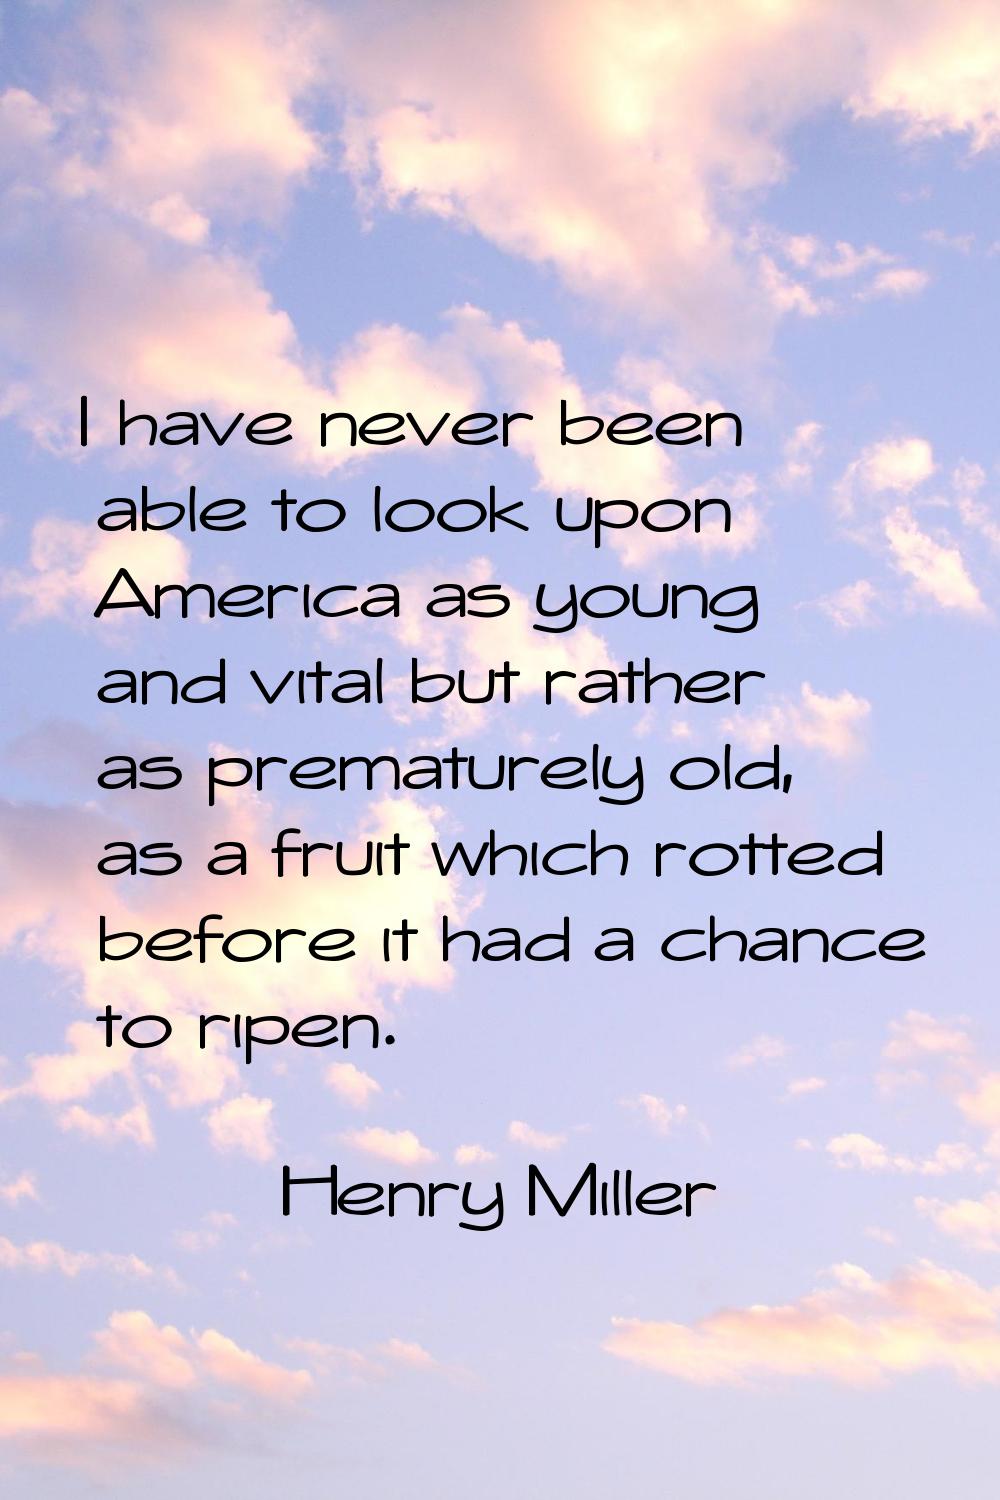 I have never been able to look upon America as young and vital but rather as prematurely old, as a 